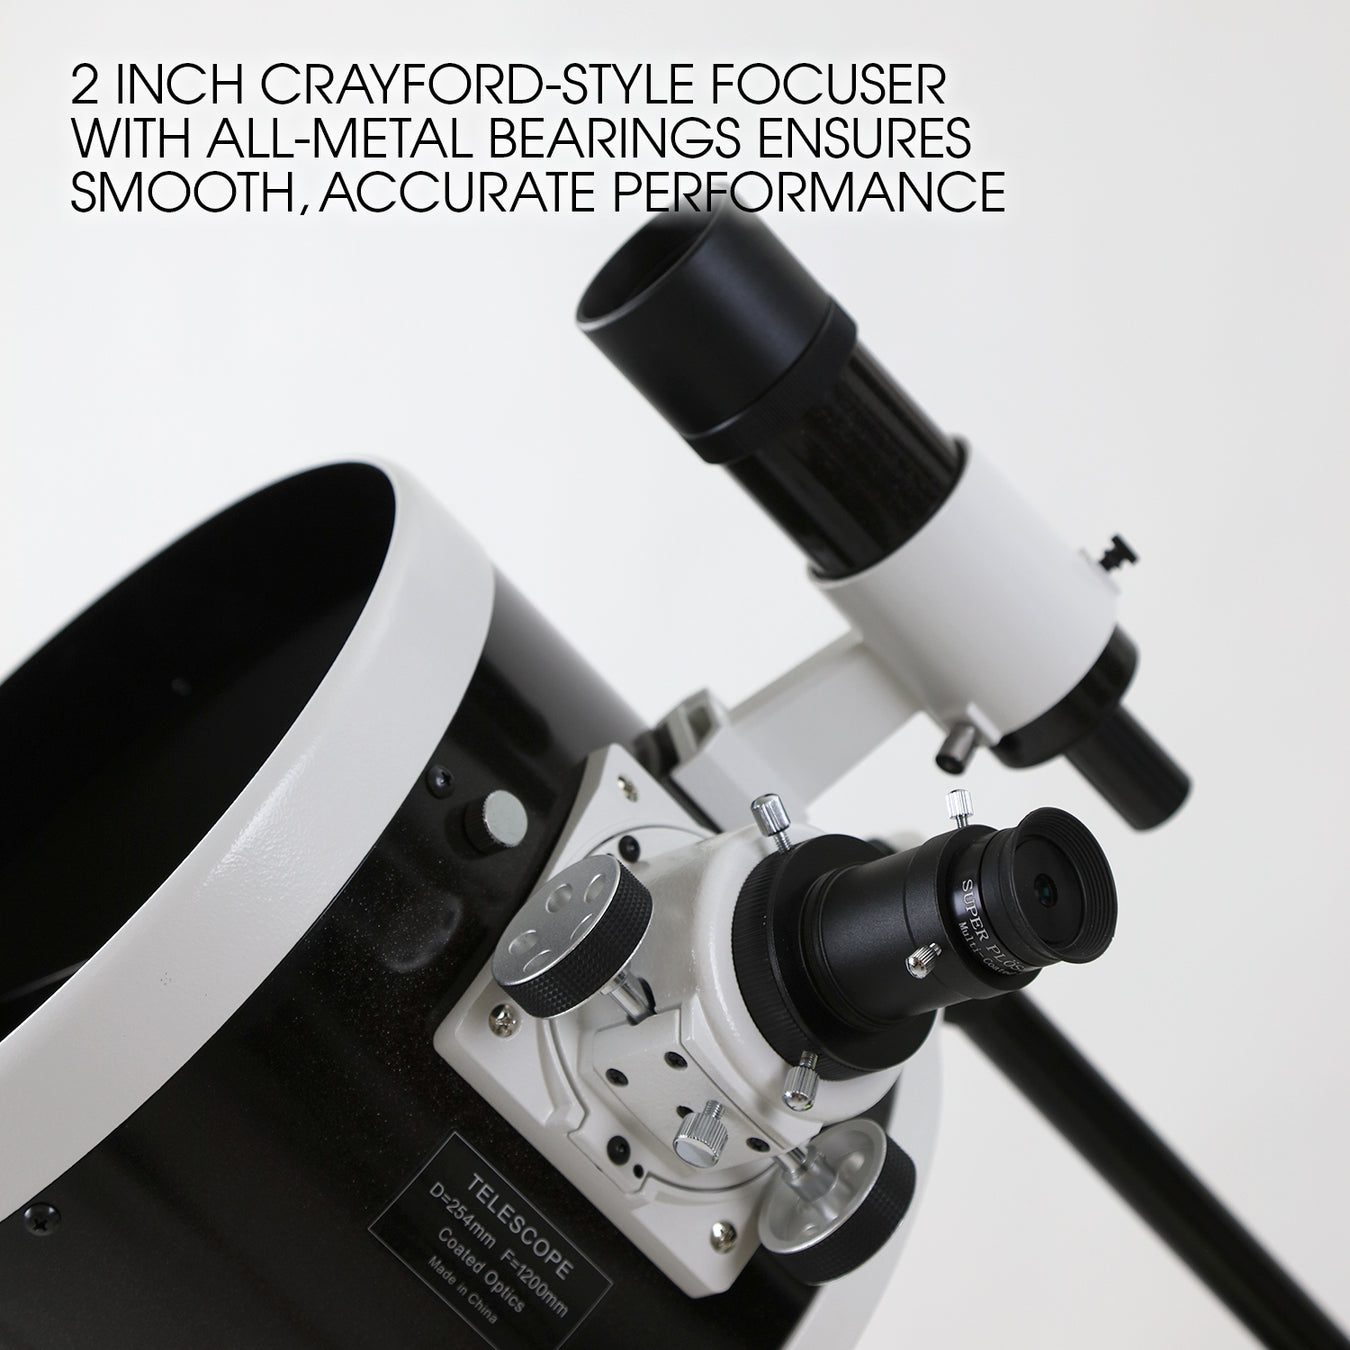 Flextube 250P SynScan GoTo Collapsible Dobsonian